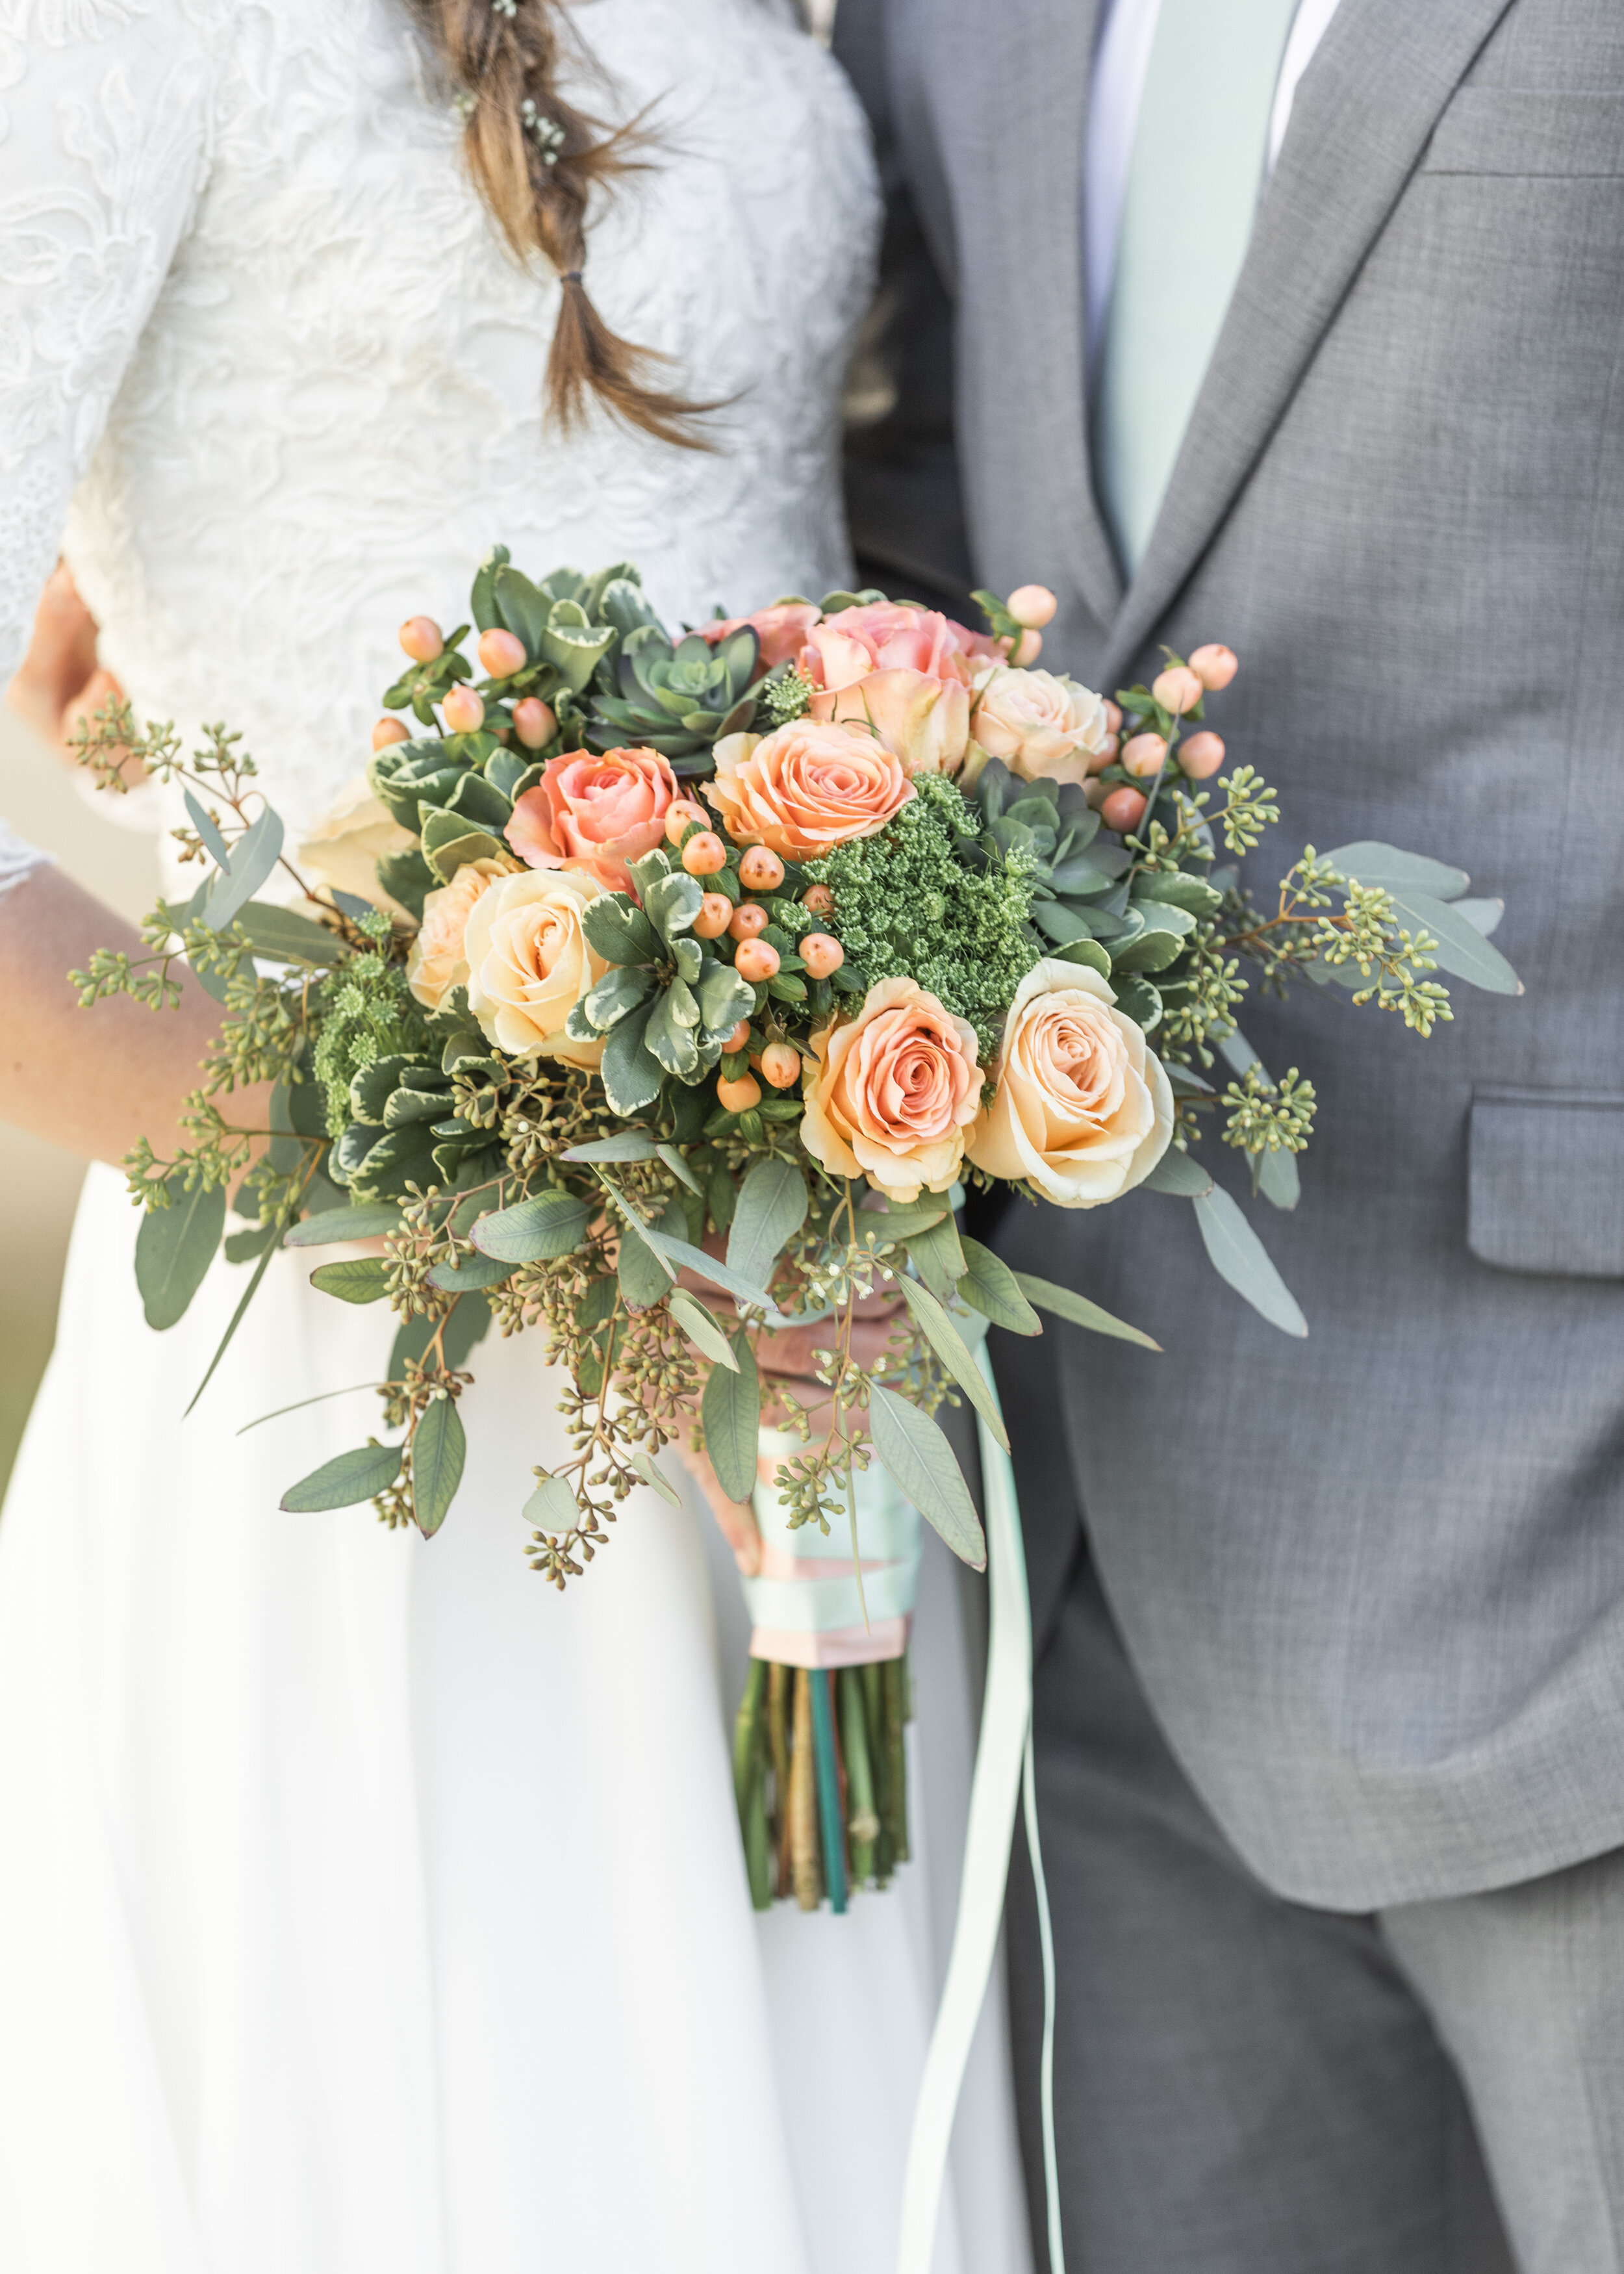  &nbsp;coral wedding bouquet orange wedding flowers orange roses in bouquet fresh blooms bridal bouquet wedding flower inspiration bouquet ideas coral and green wedding colors berries in bridal bouquet bride wedding photography #claritylanephotograph